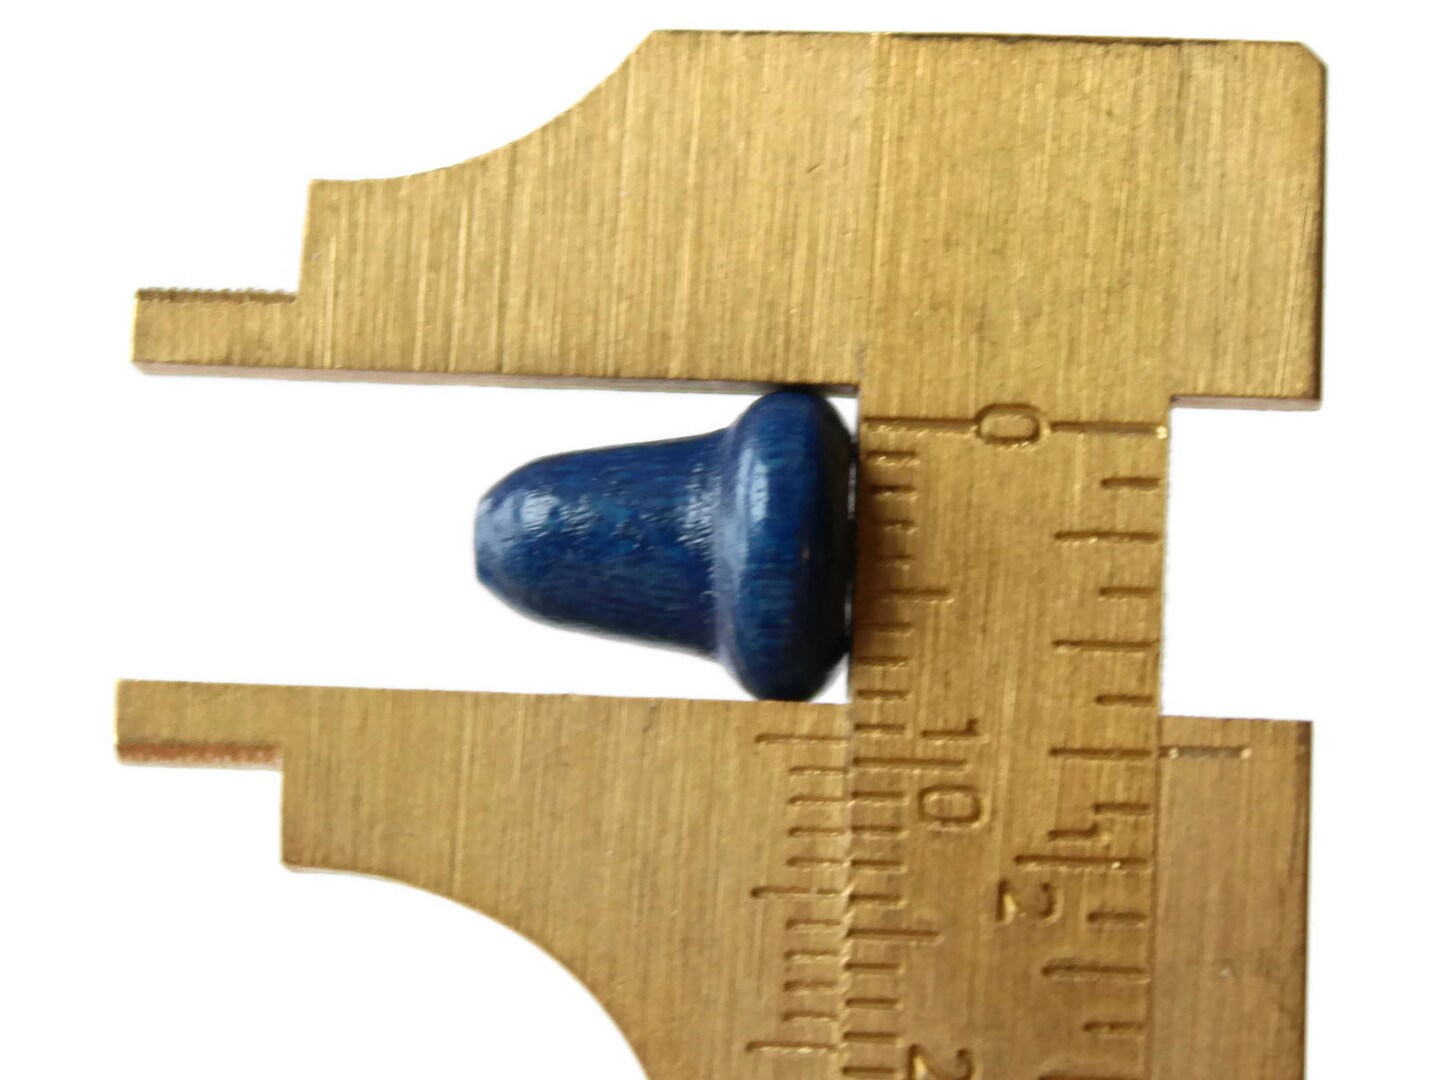 20 11mm Blue Wooden Bell Beads Vintage Wood End Beads Loose Bell Shaped Beads